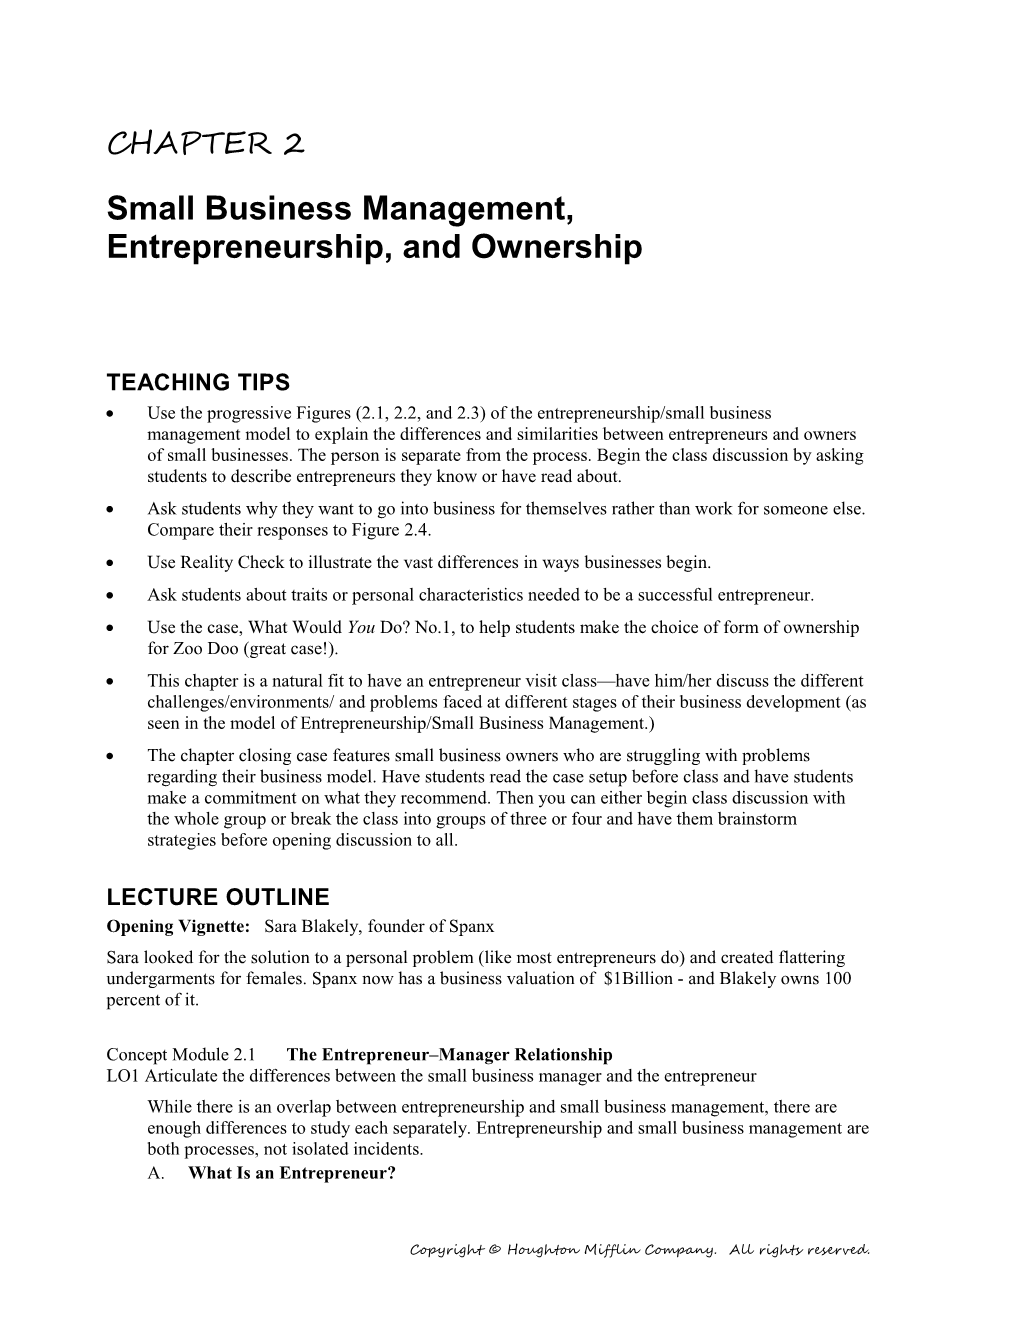 Small Business Management, Entrepreneurship, and Ownership s1